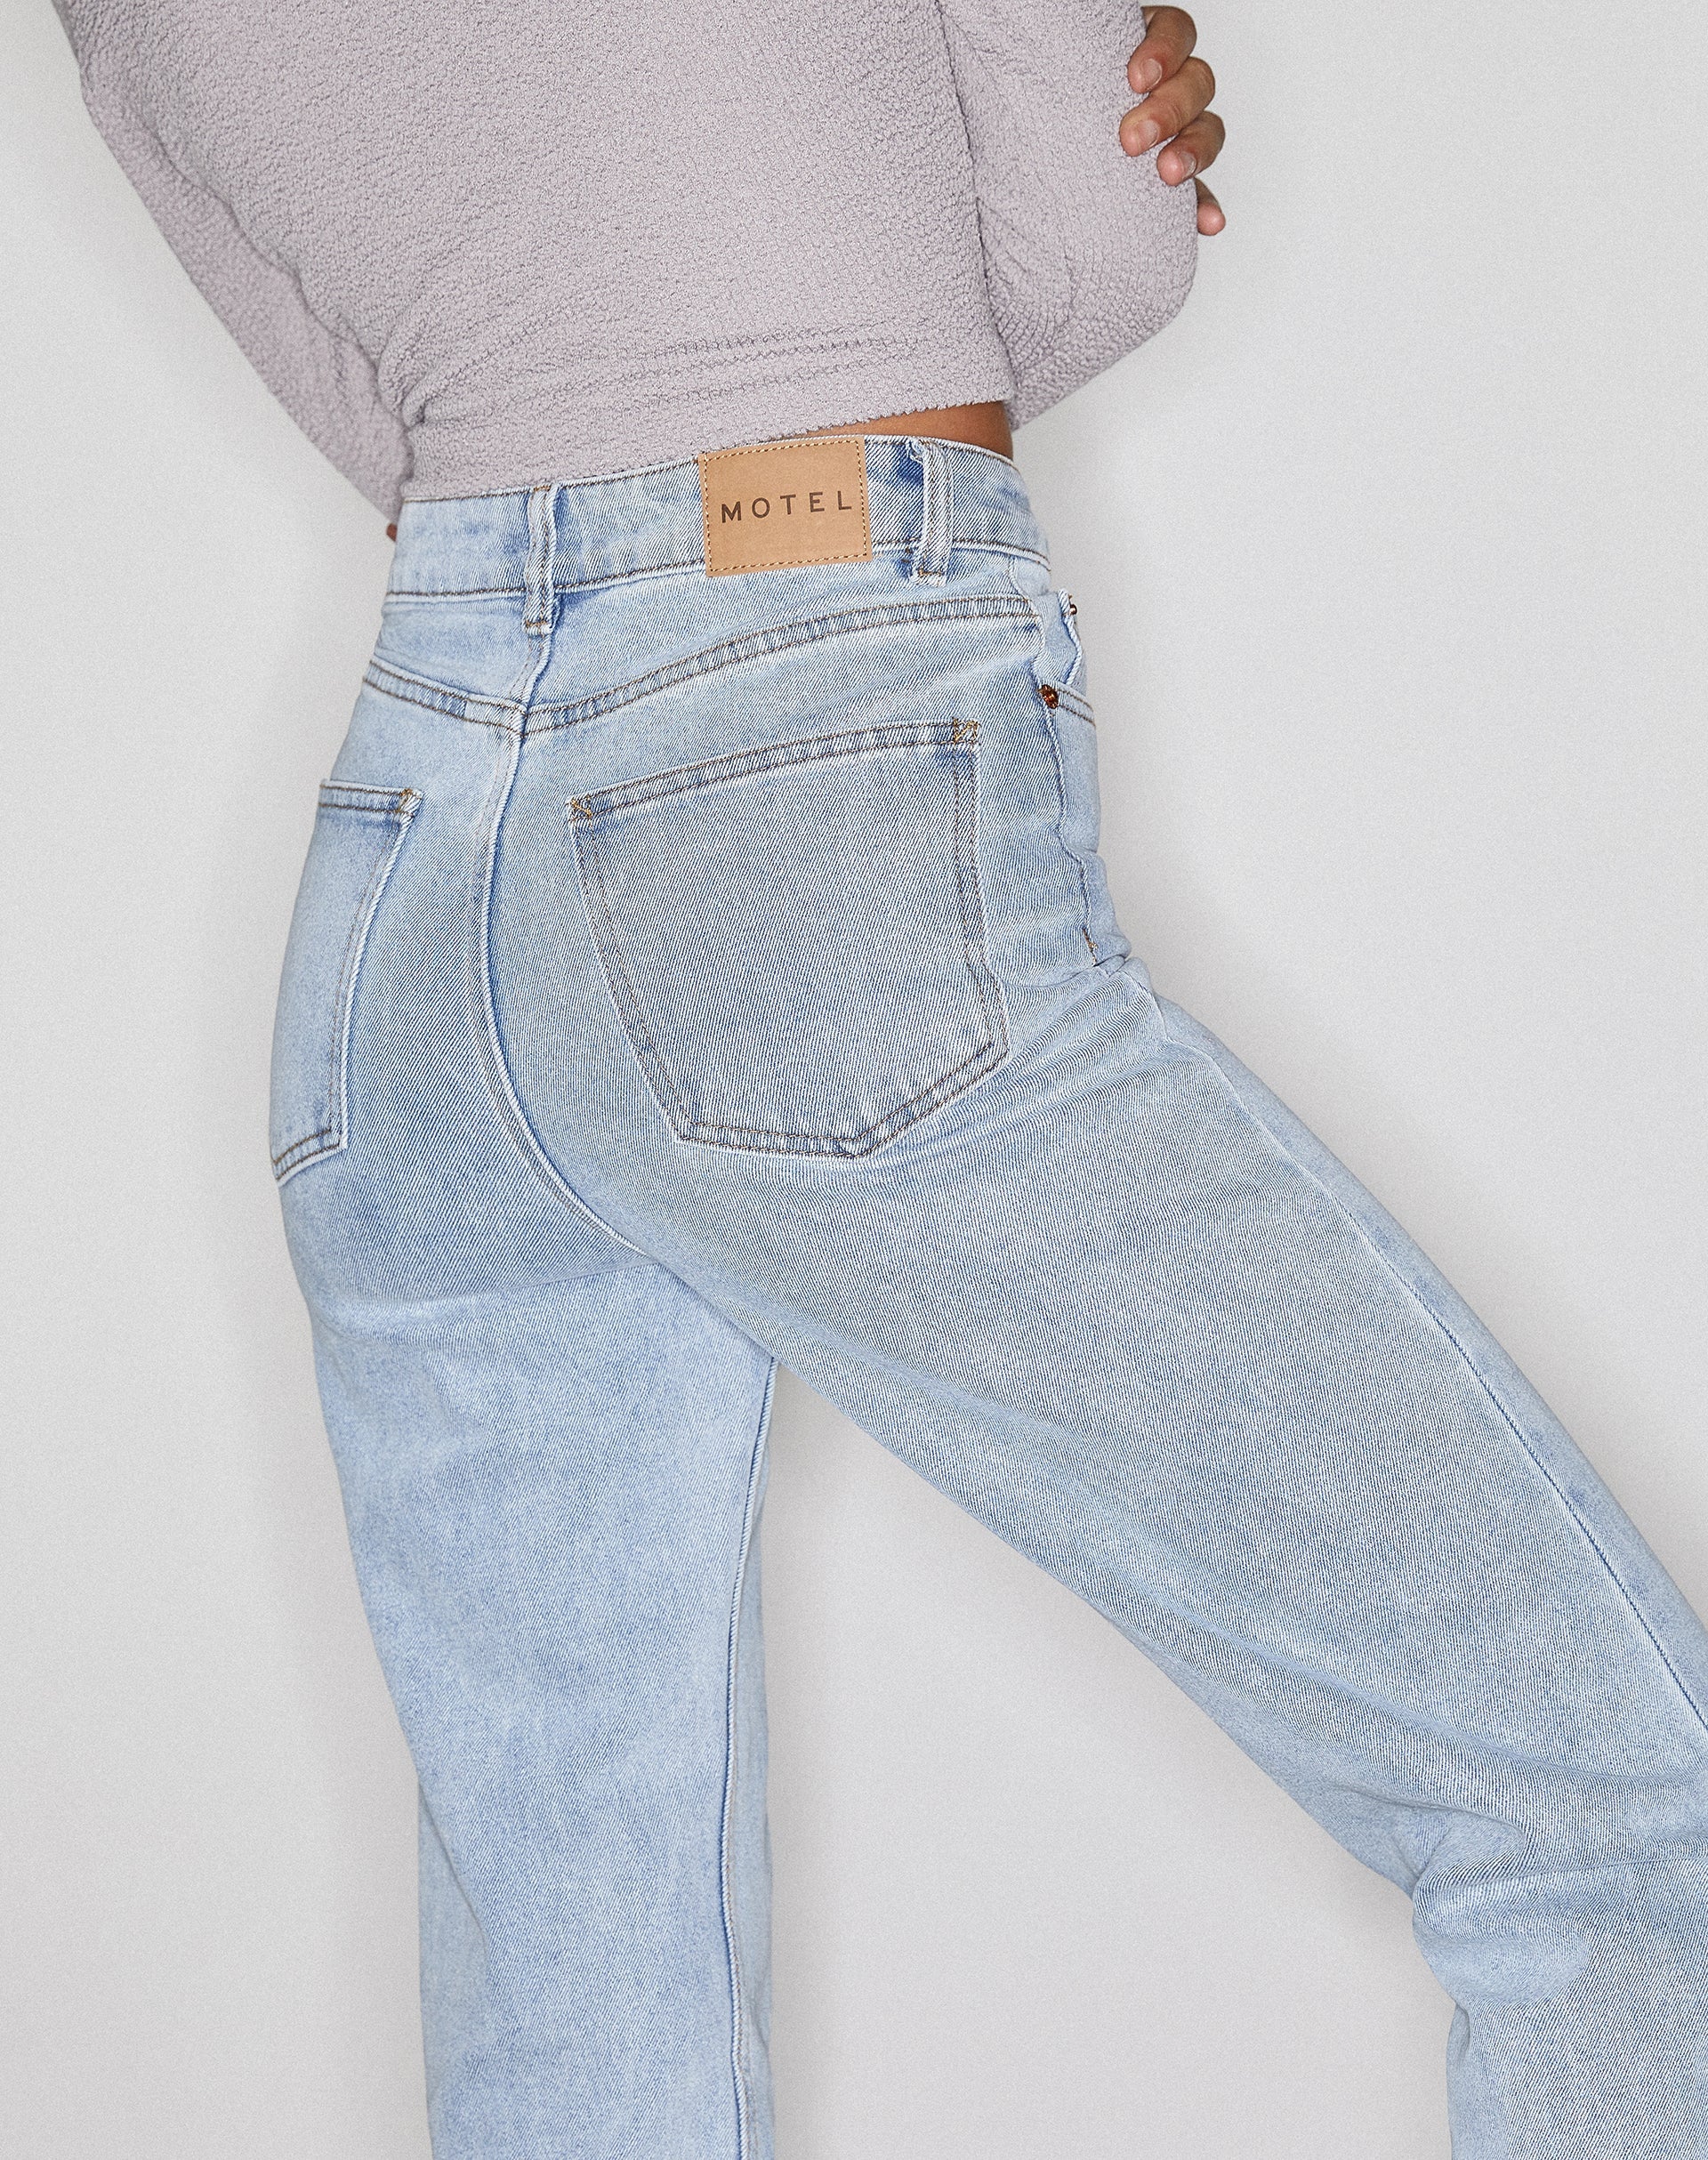 Image of Straight Leg Jeans in Light Wash Blue